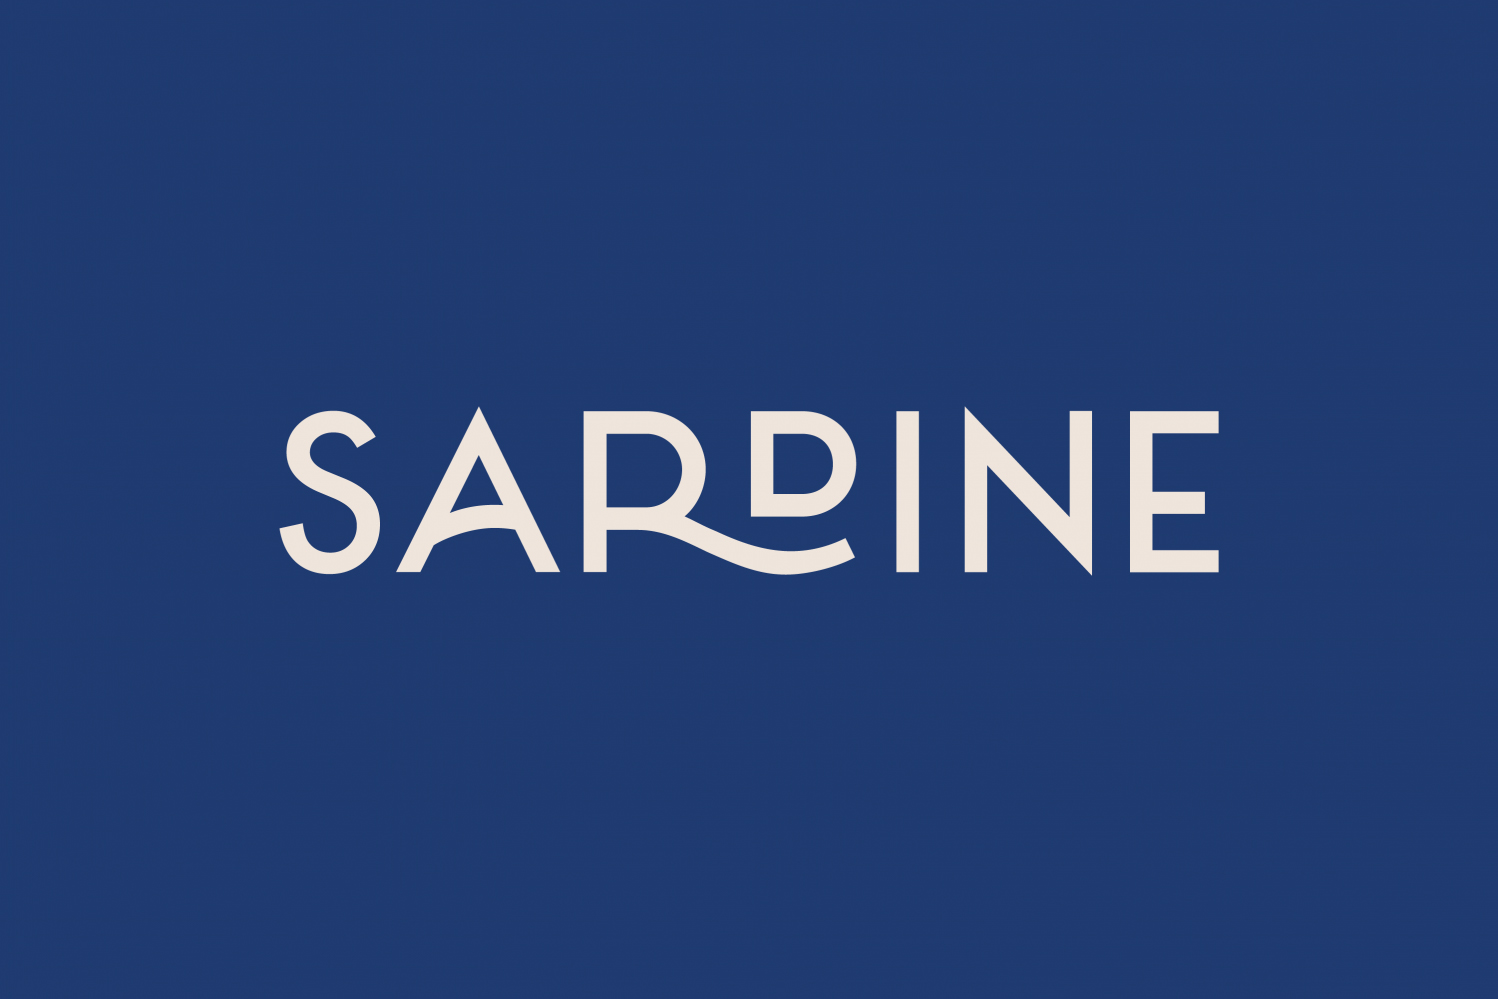 Logo, menus and signage by British studio Here Design for London-based Southern French and Mediterranean food restaurant Sardine